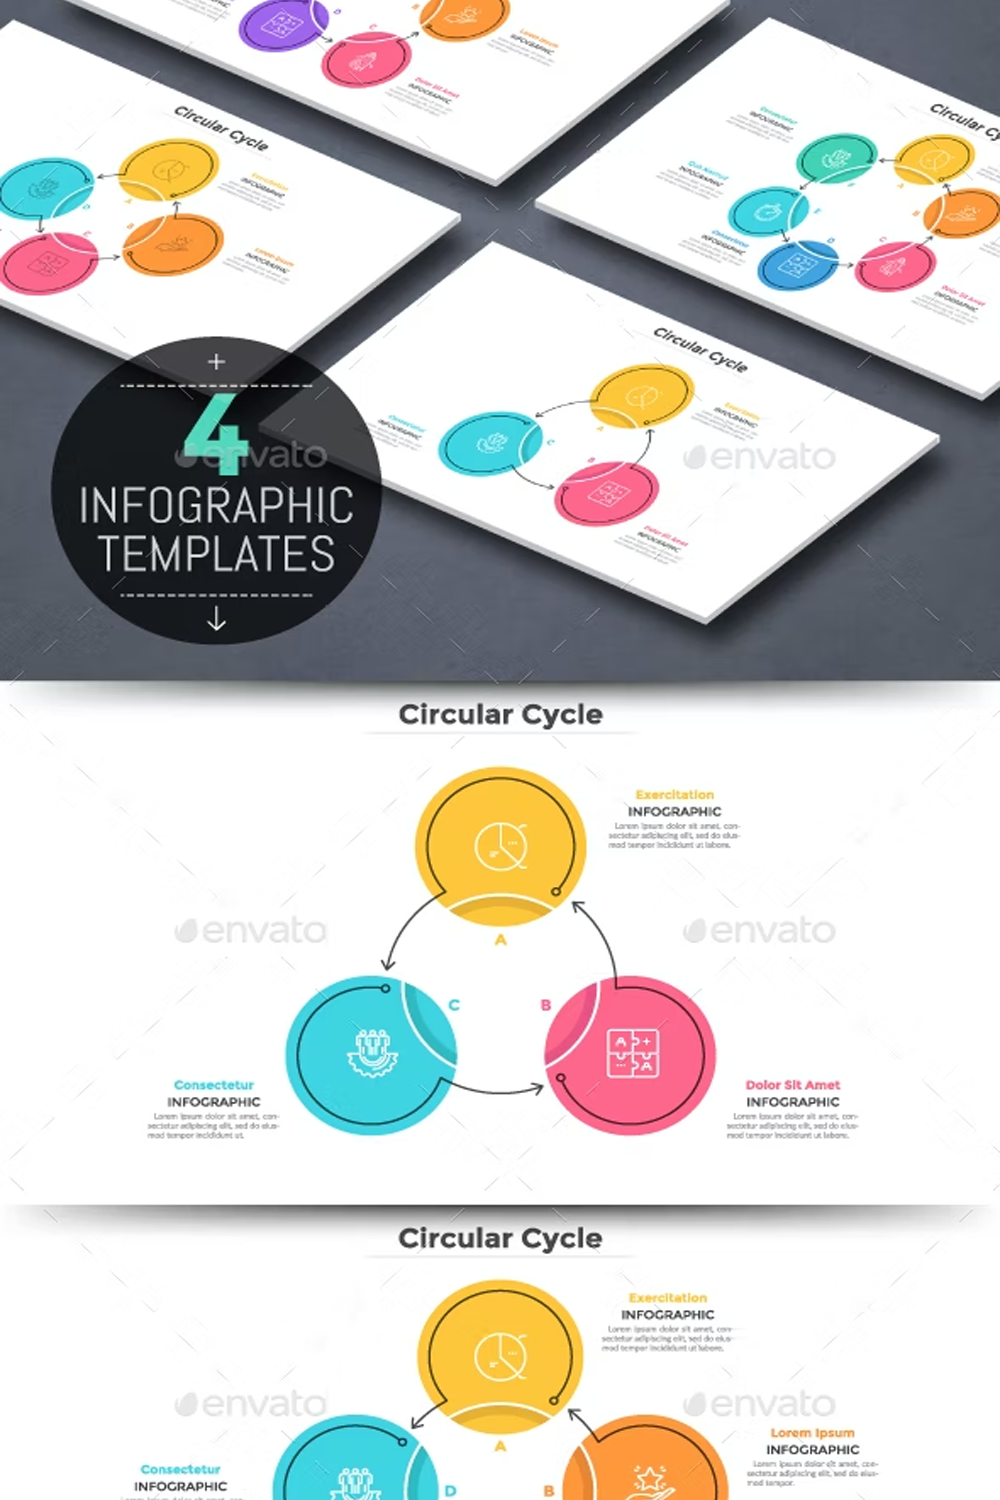 Illustrations 4 cycle infographic templates of pinterest.